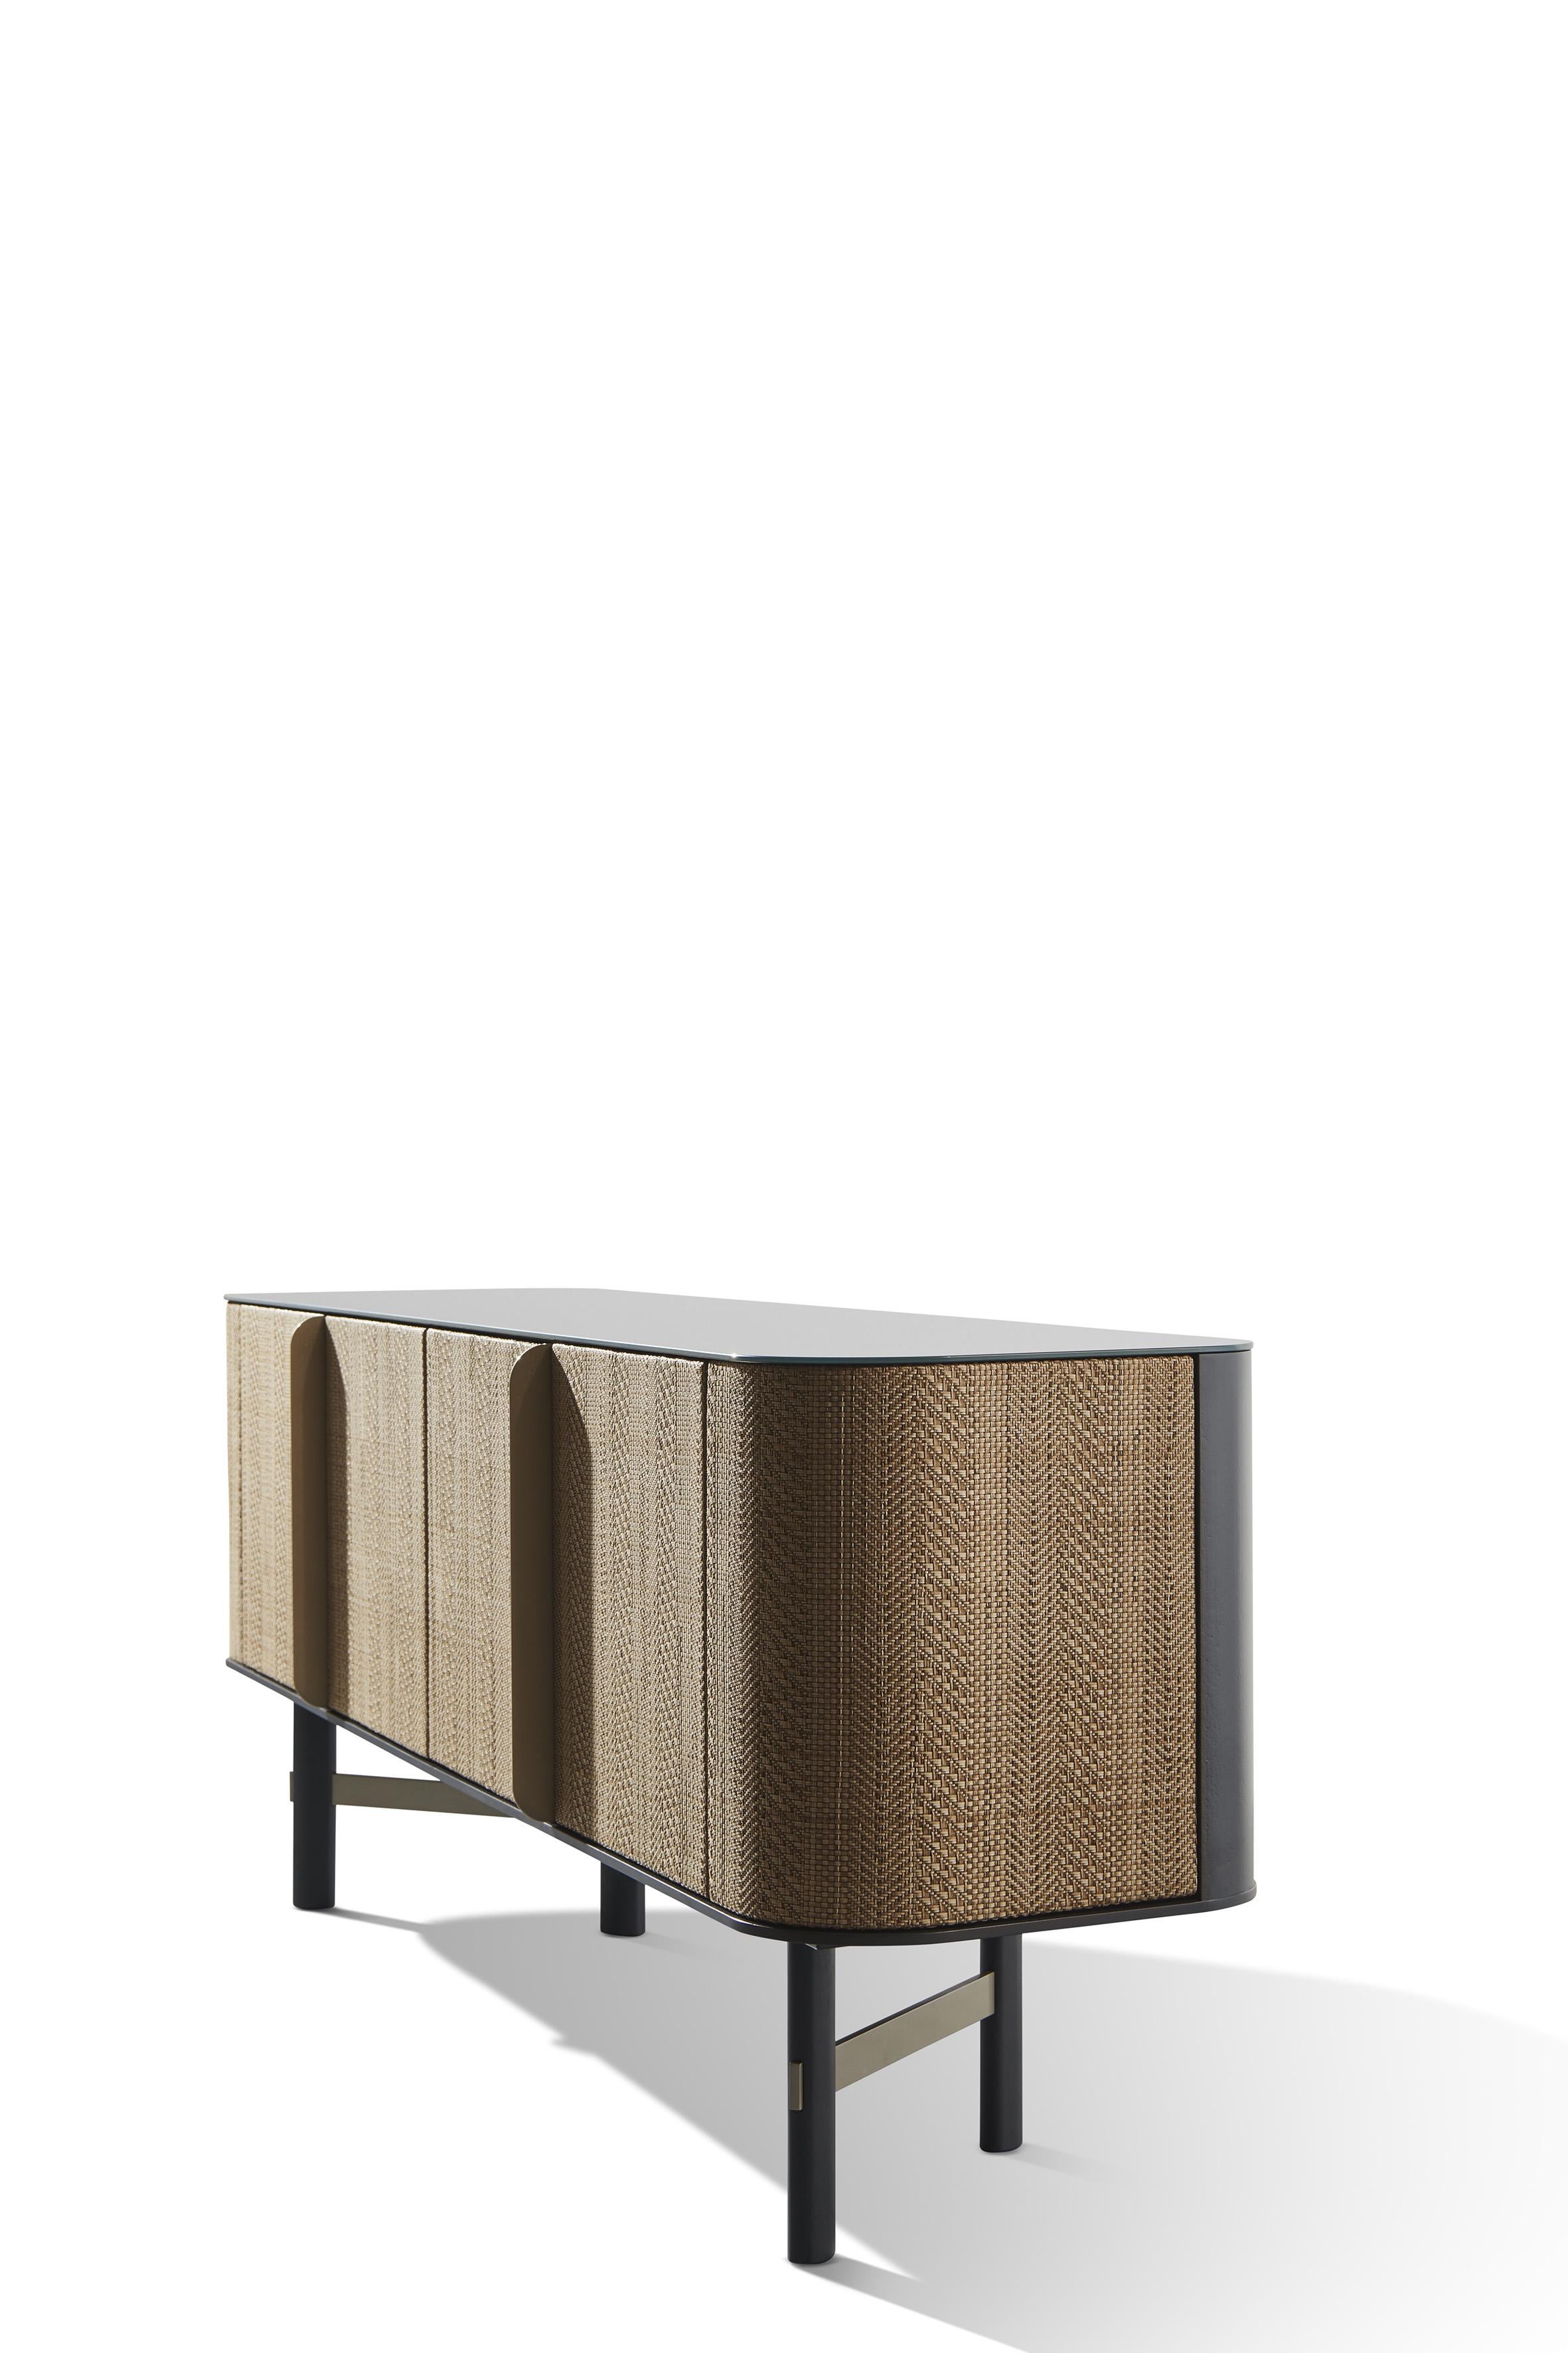 Sideboard with plywood and MDF lacquered body. Four doors upholstered in water-repellent and cleanable ecoleather One or two internal adjustable shelves. Top available in two options: 6 mm porcelain stoneware; 6 mm glass painted below.